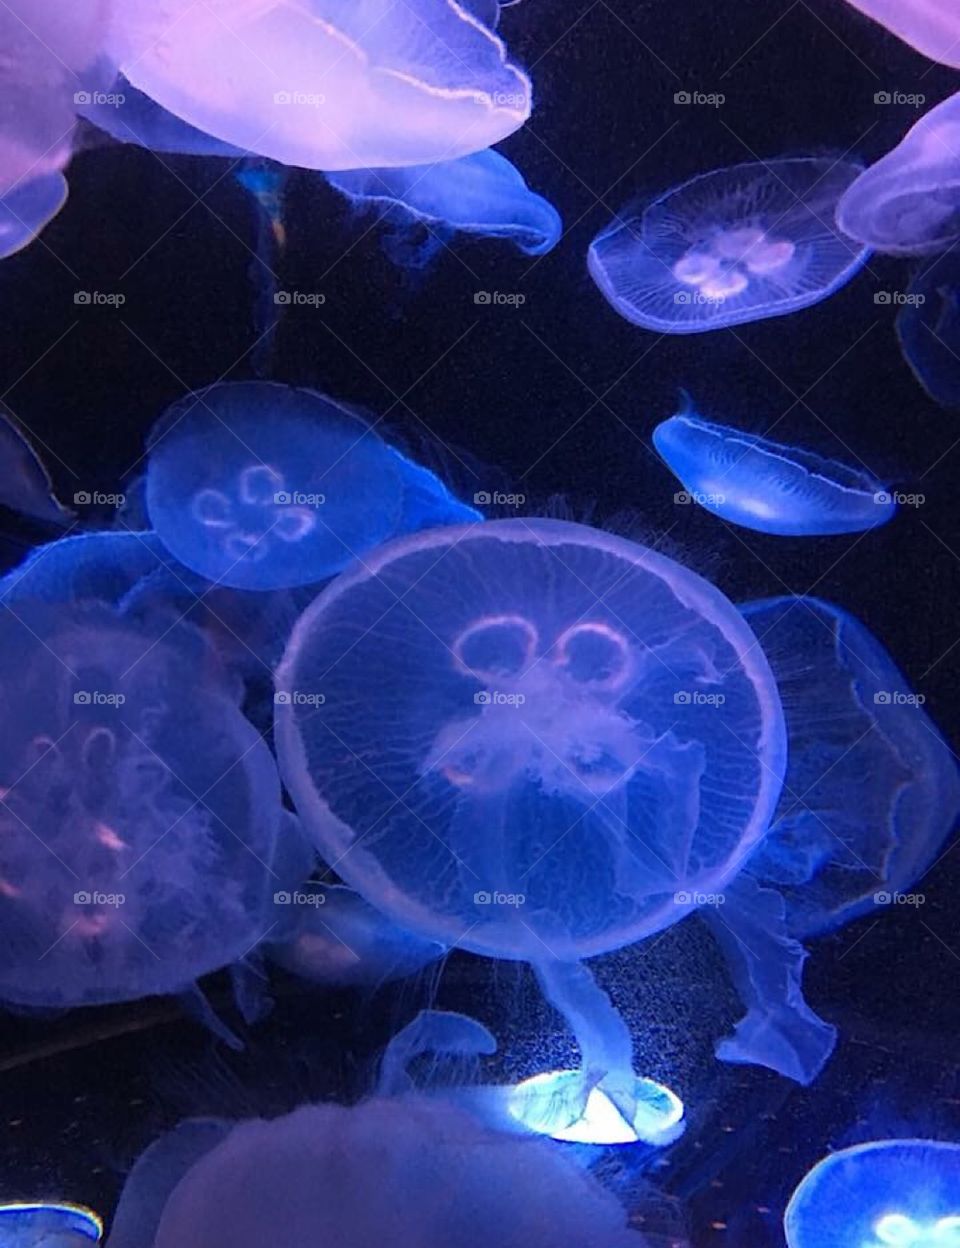 Glowing Moon Jellyfish at the Aquarium of the Pacific in Long Beach, CA.